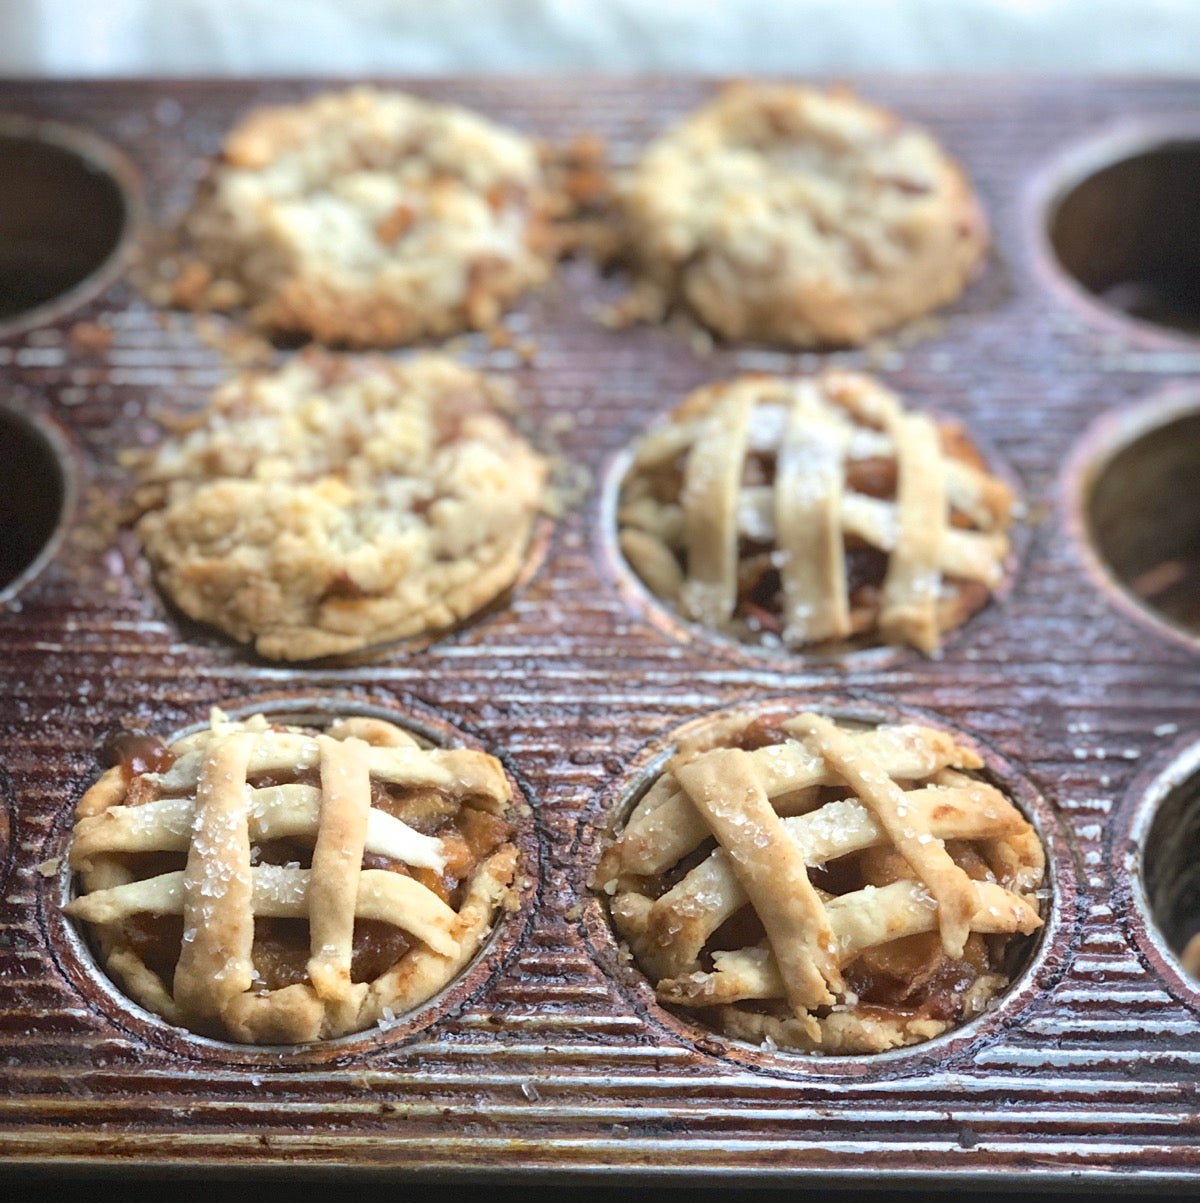 Baking Guides: How to Make Mini Pies